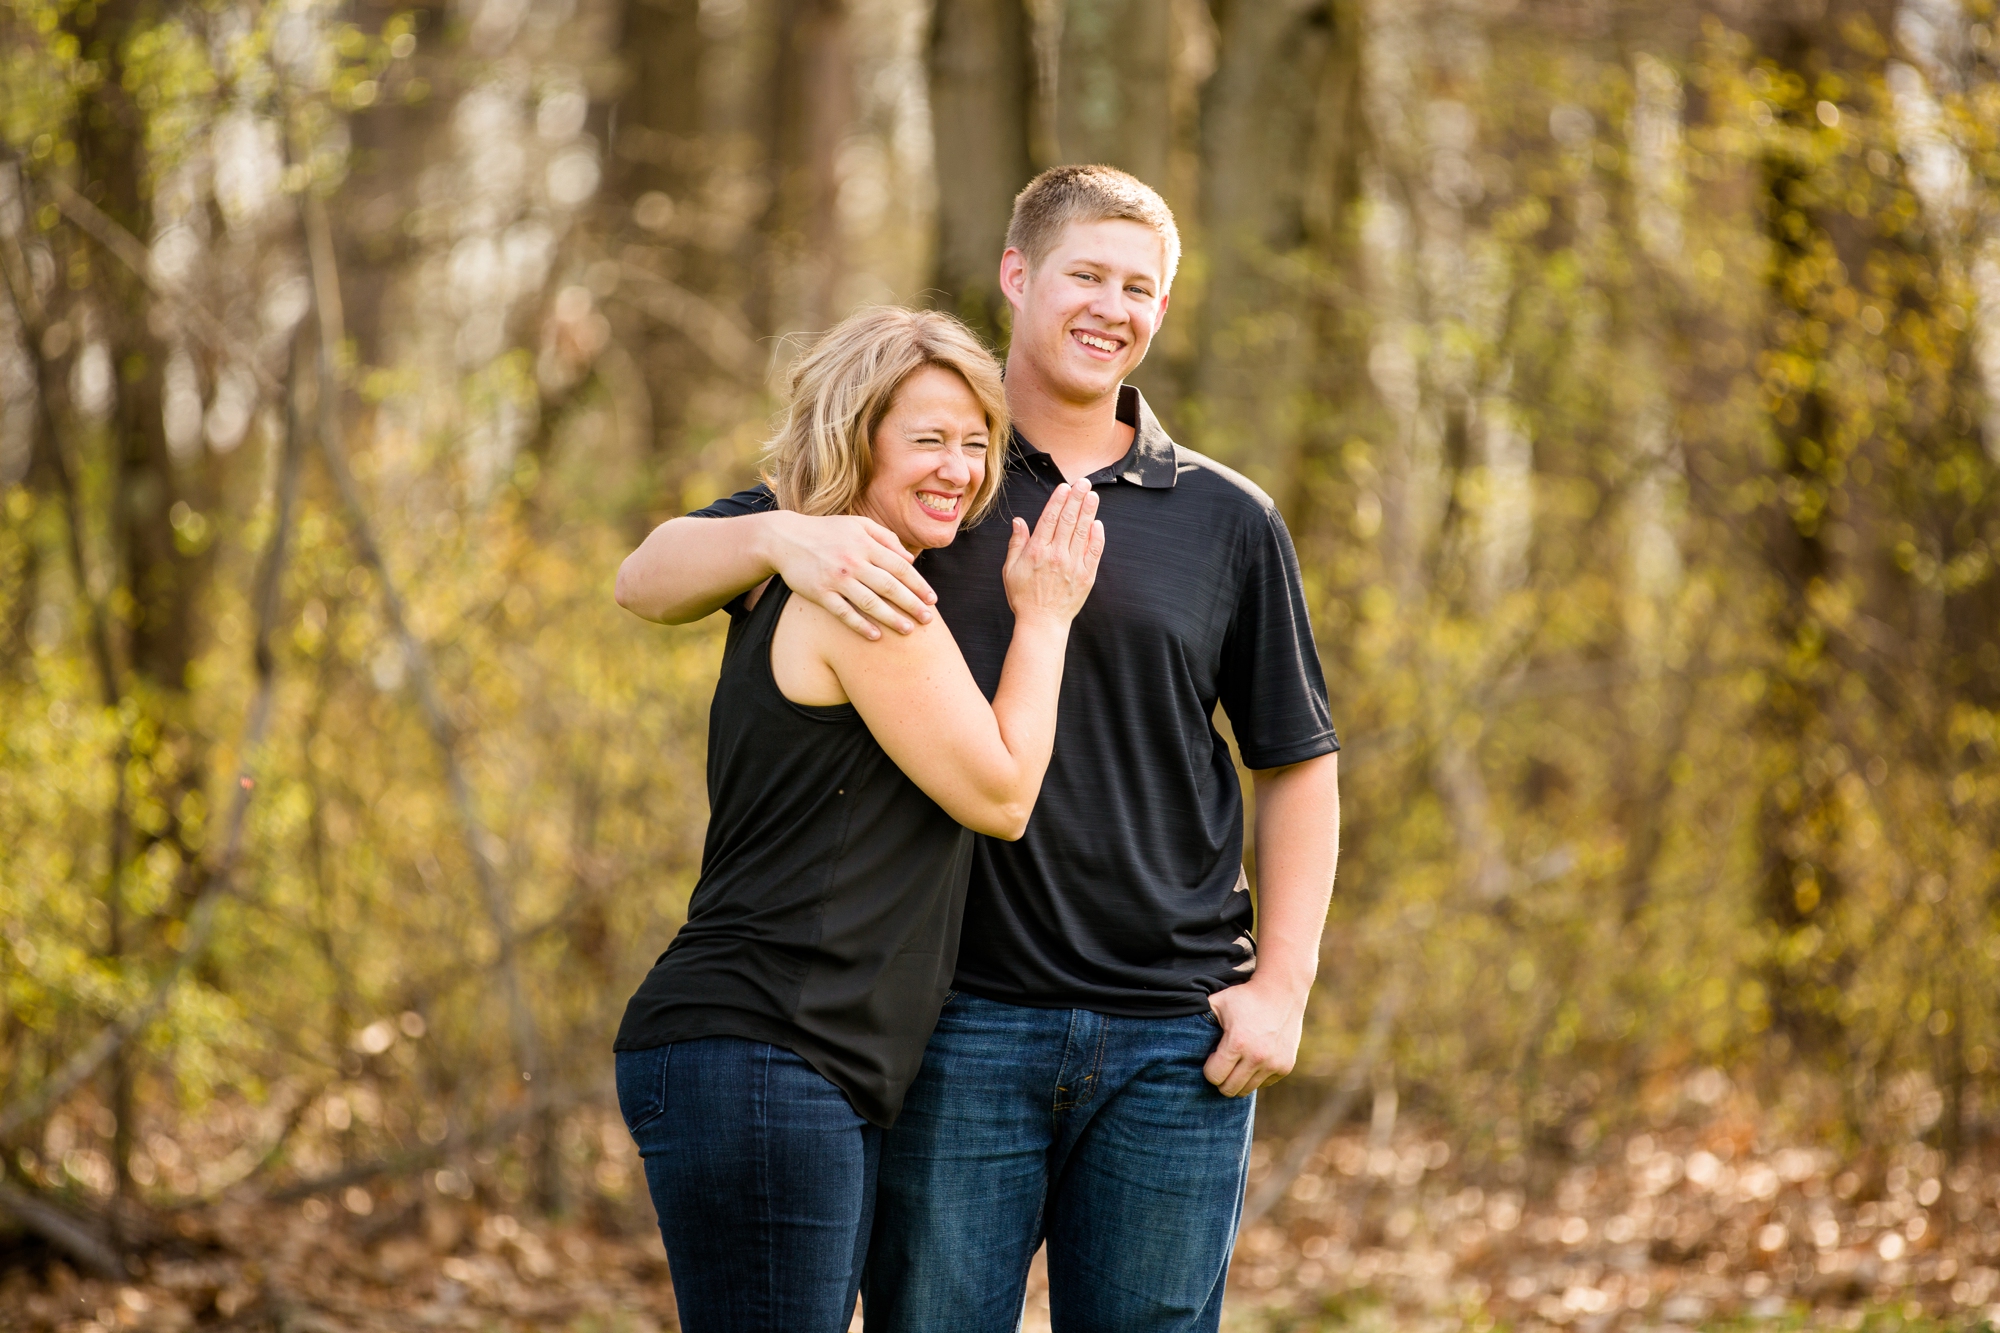 cranberry township family pictures, cranberry township family photographer, cranberry township senior photographer, pittsburgh senior photos, cranberry township parks